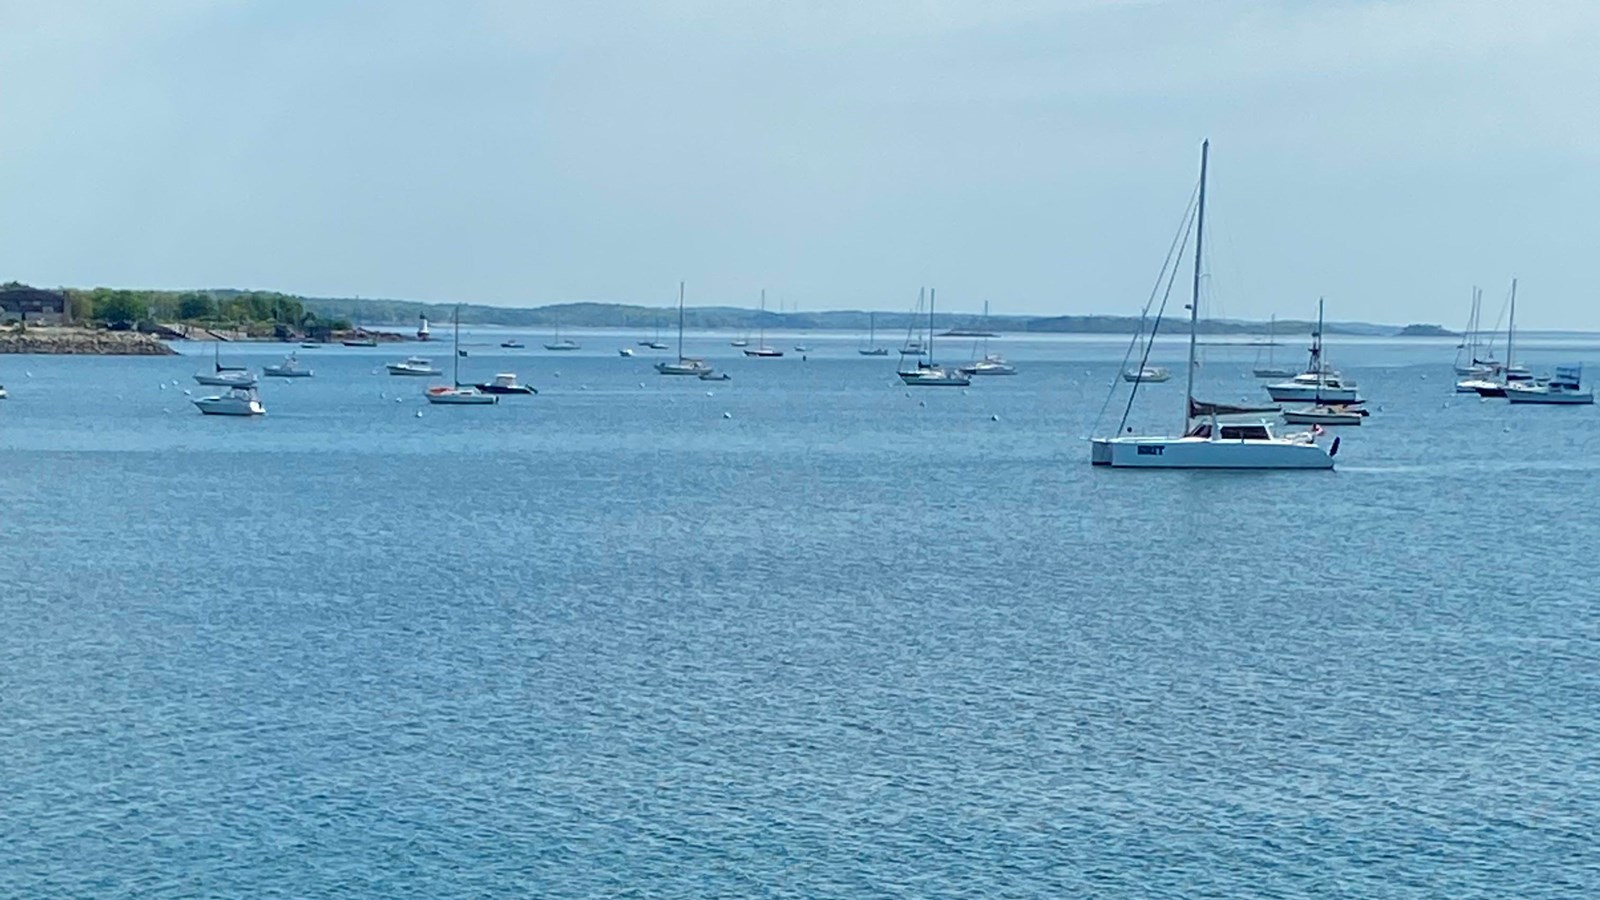 Bright blue waters with many sailing vessels anchored and land jutting out in the harbor on the left